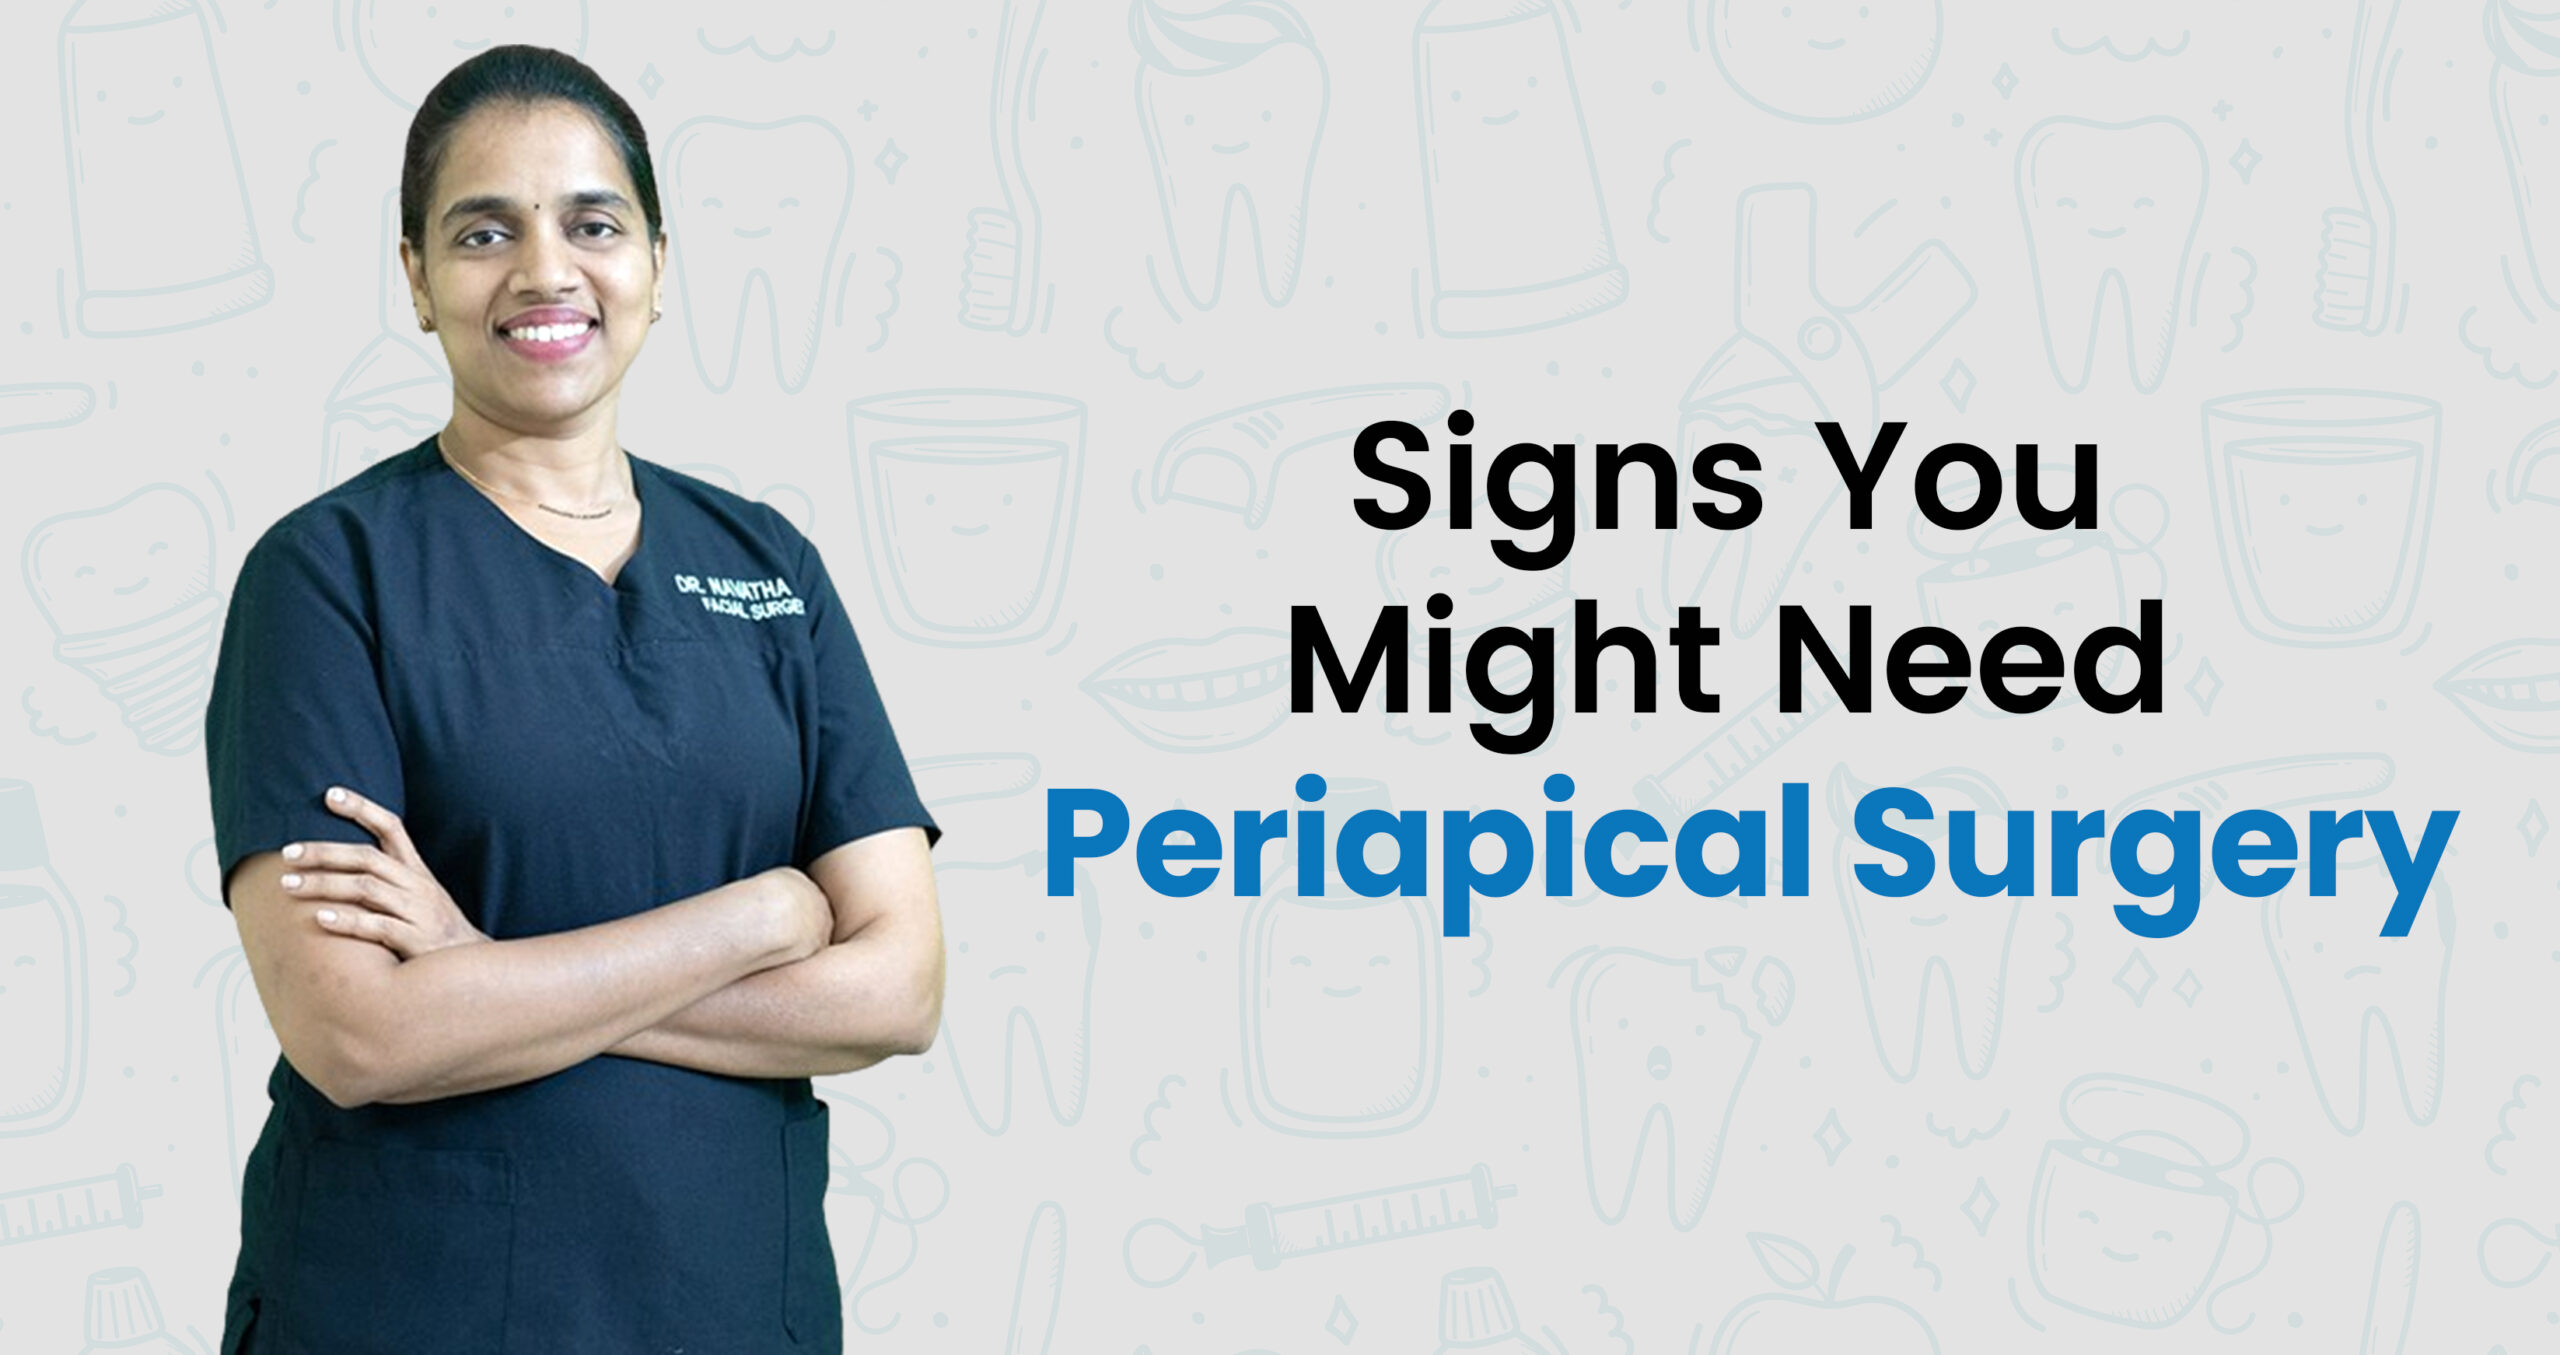 Signs You Might Need Periapical Surgery